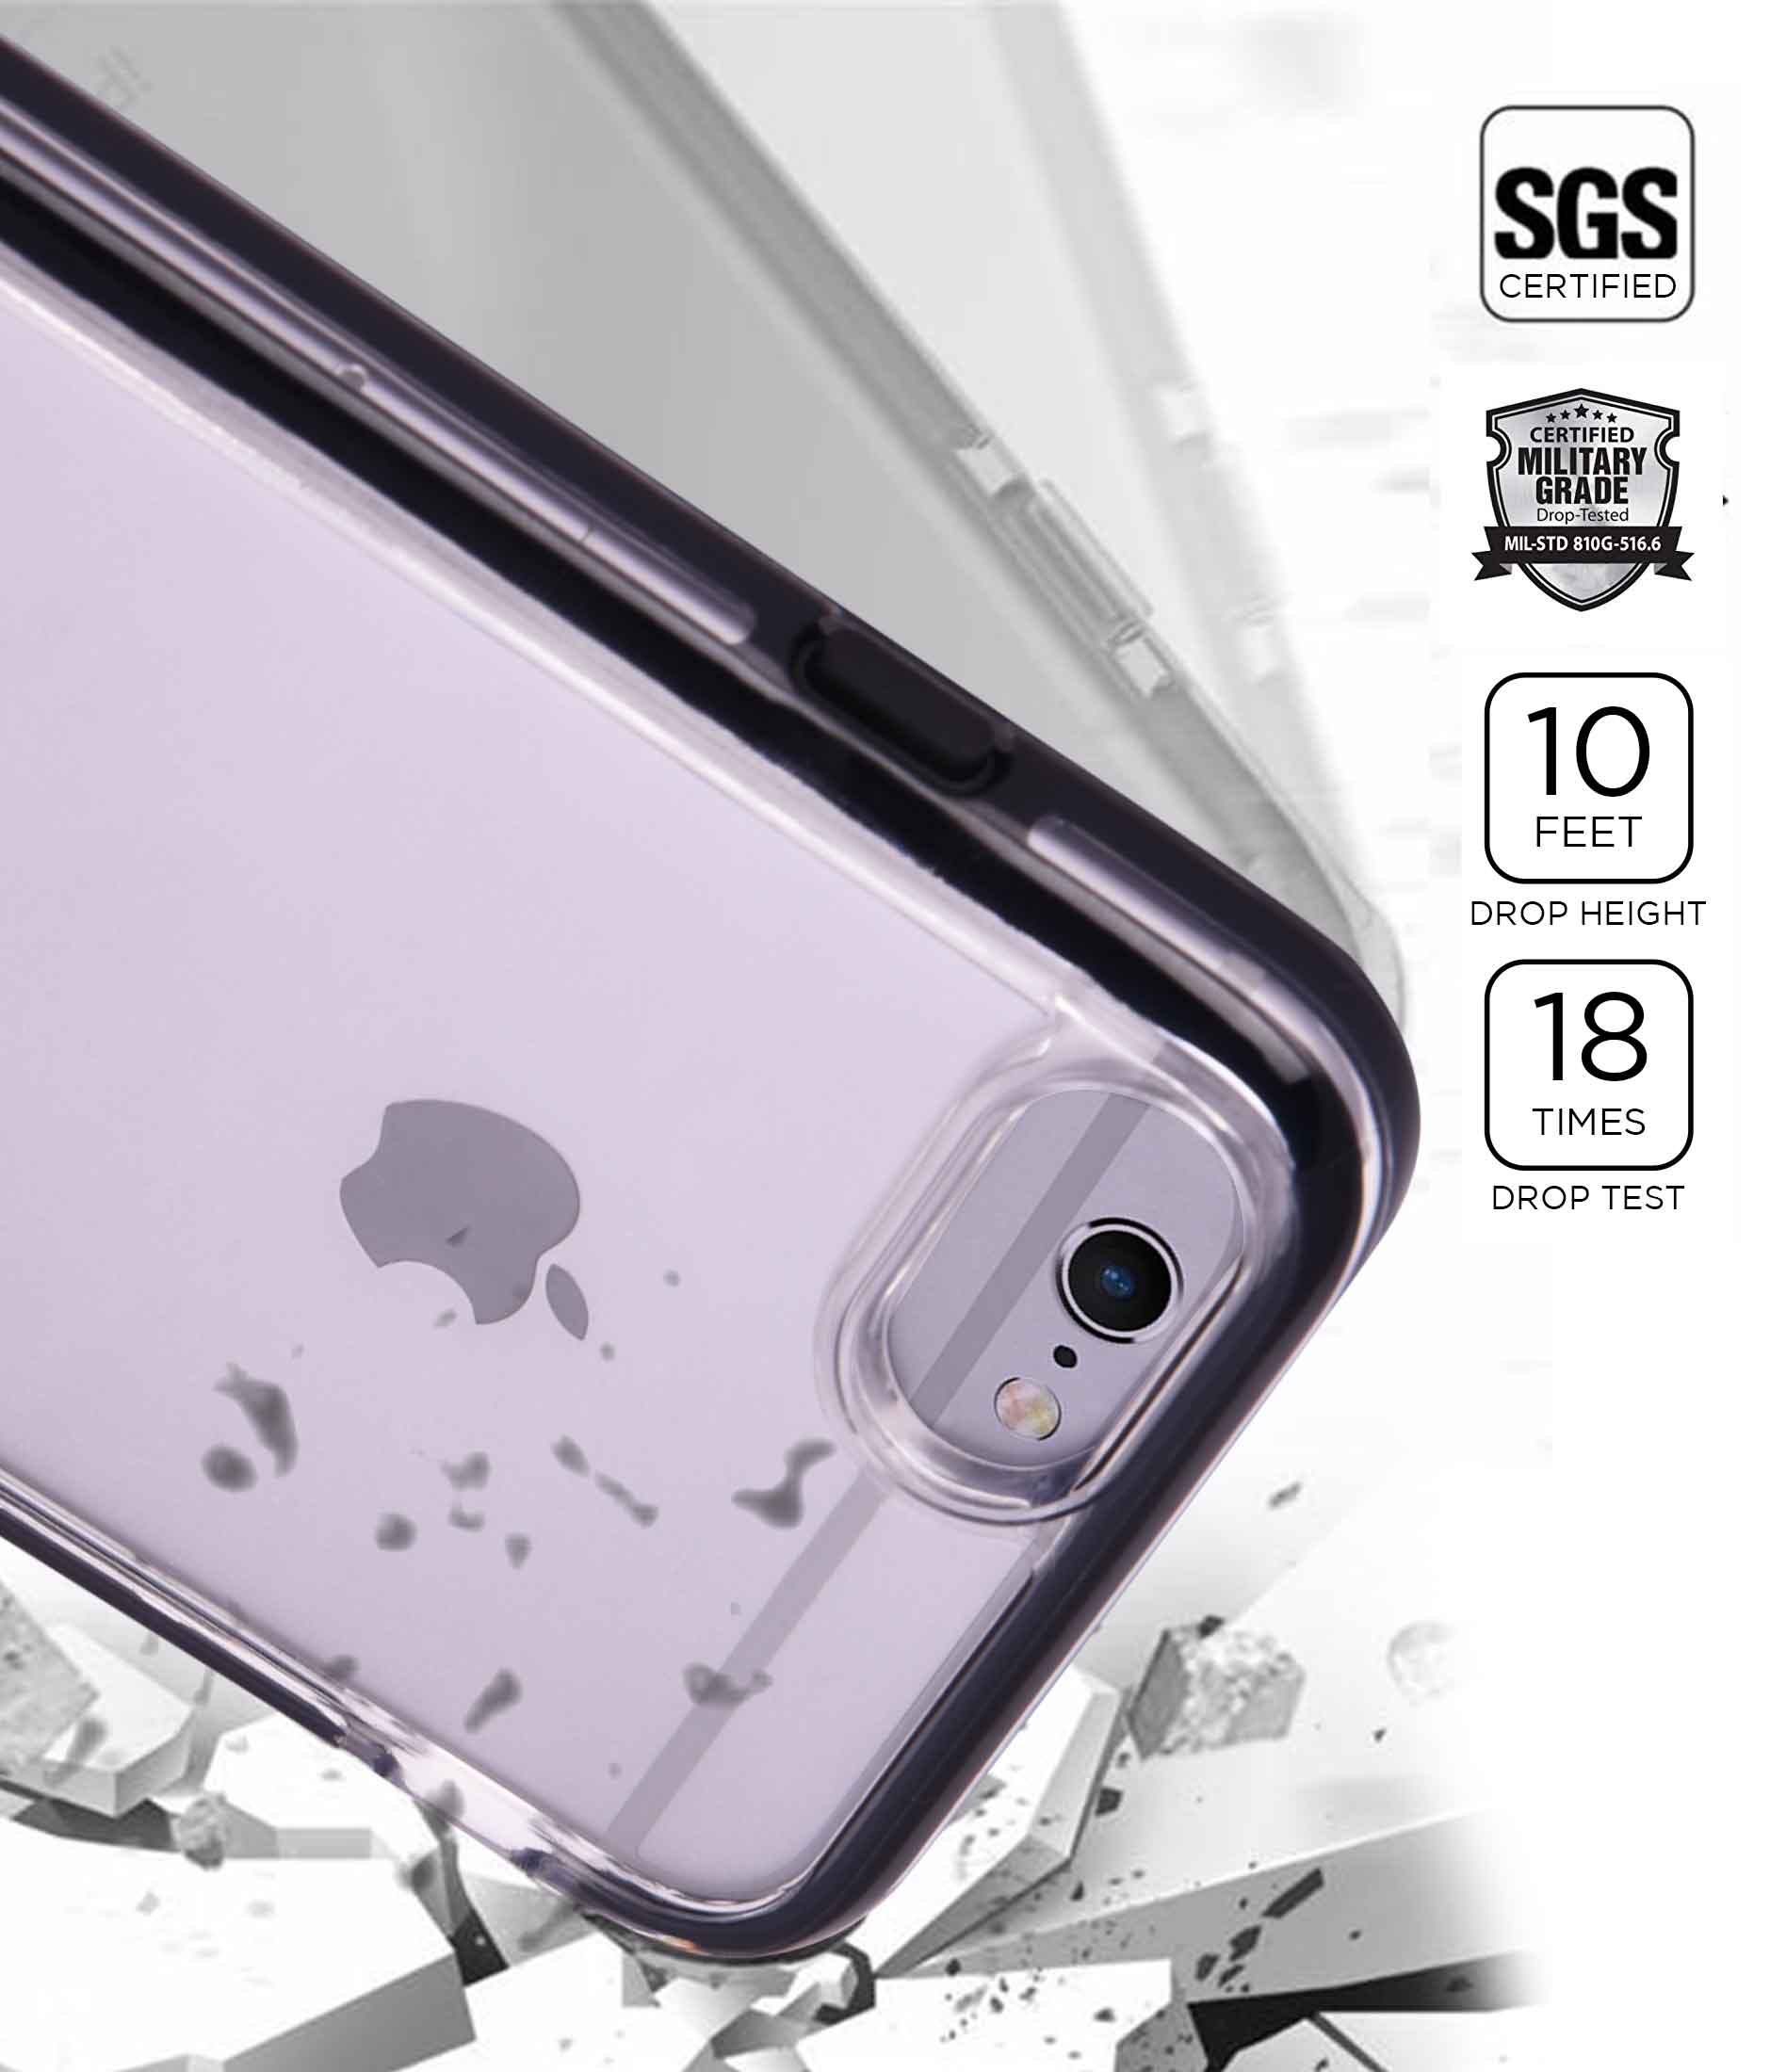 Crystal Clear - Extreme Phone Case for iPhone 6S Plus